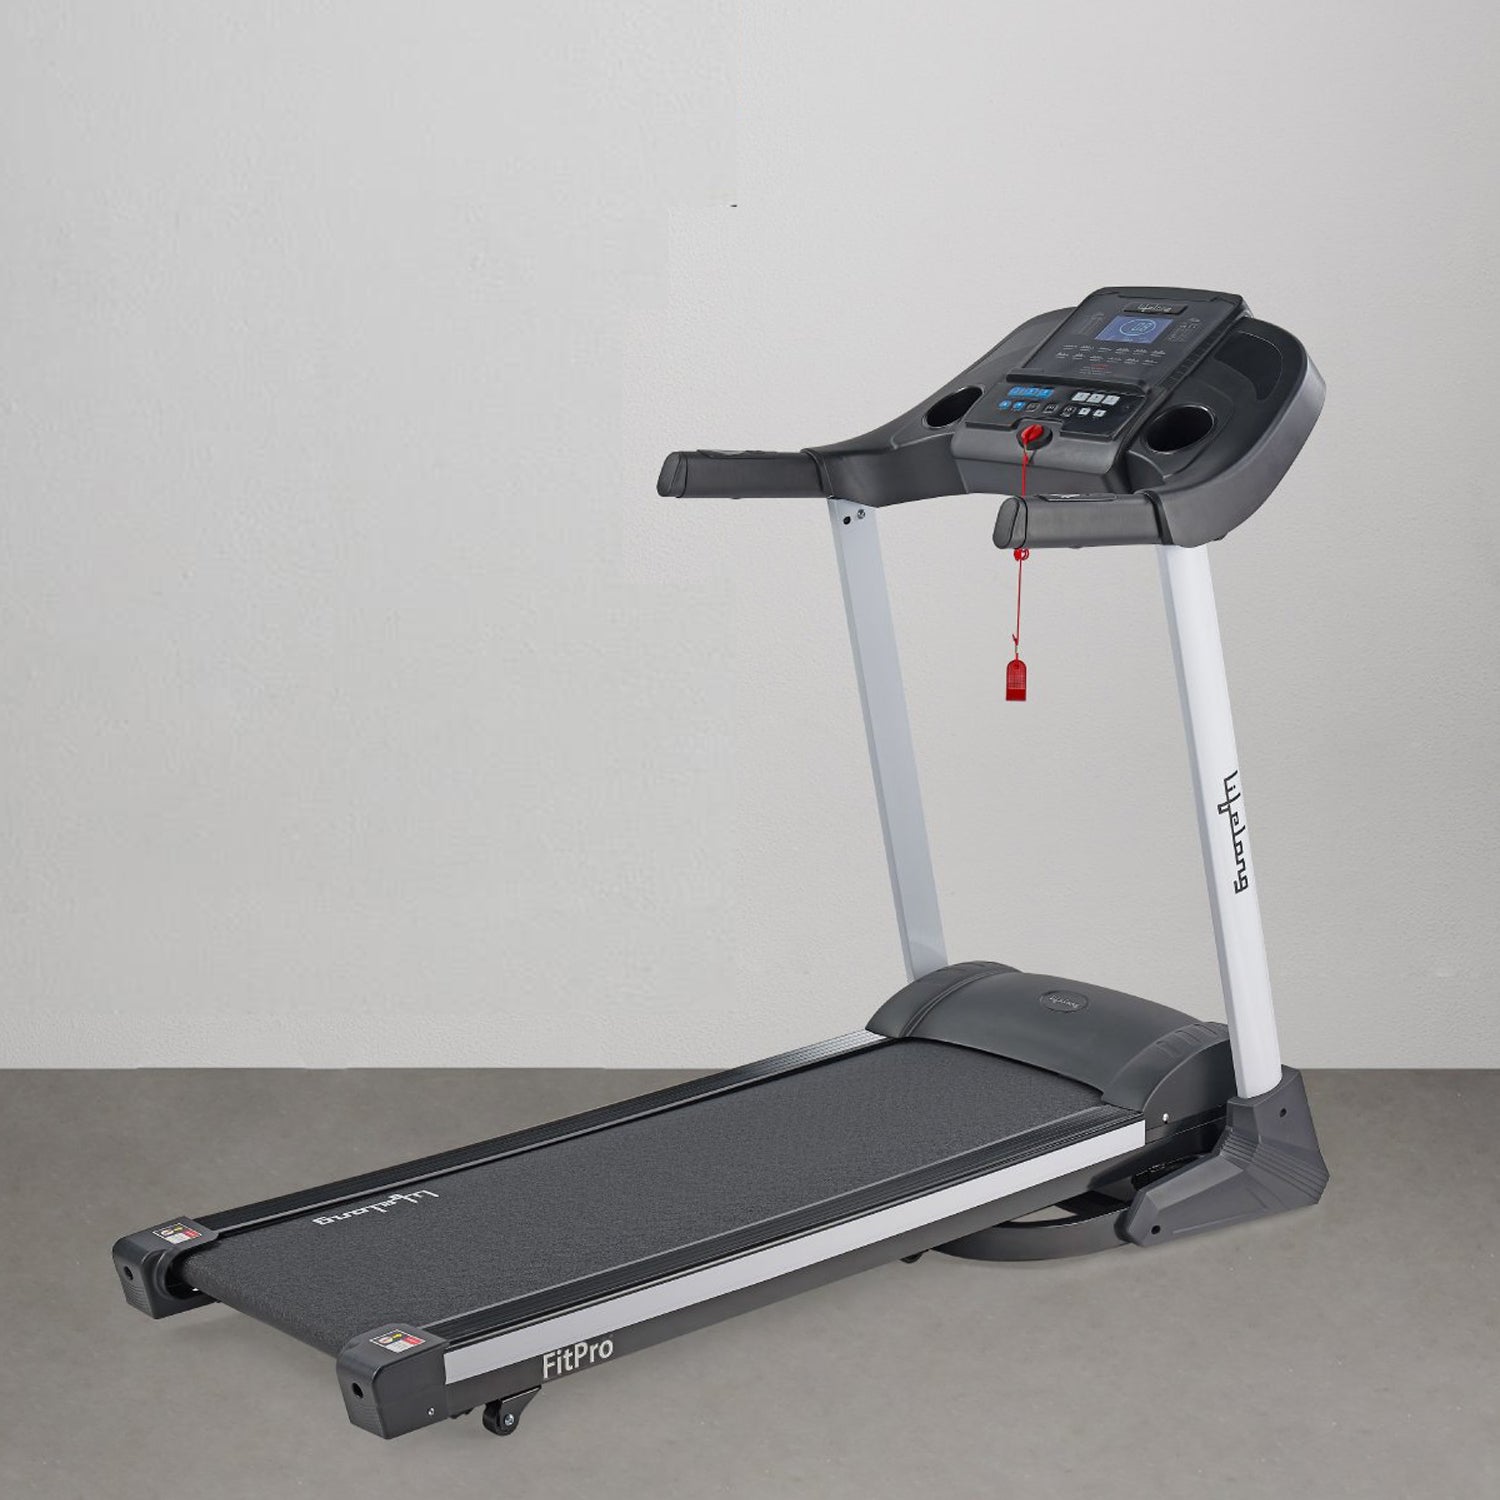 5HP Fit Pro Treadmill with Heart Rate Sensor